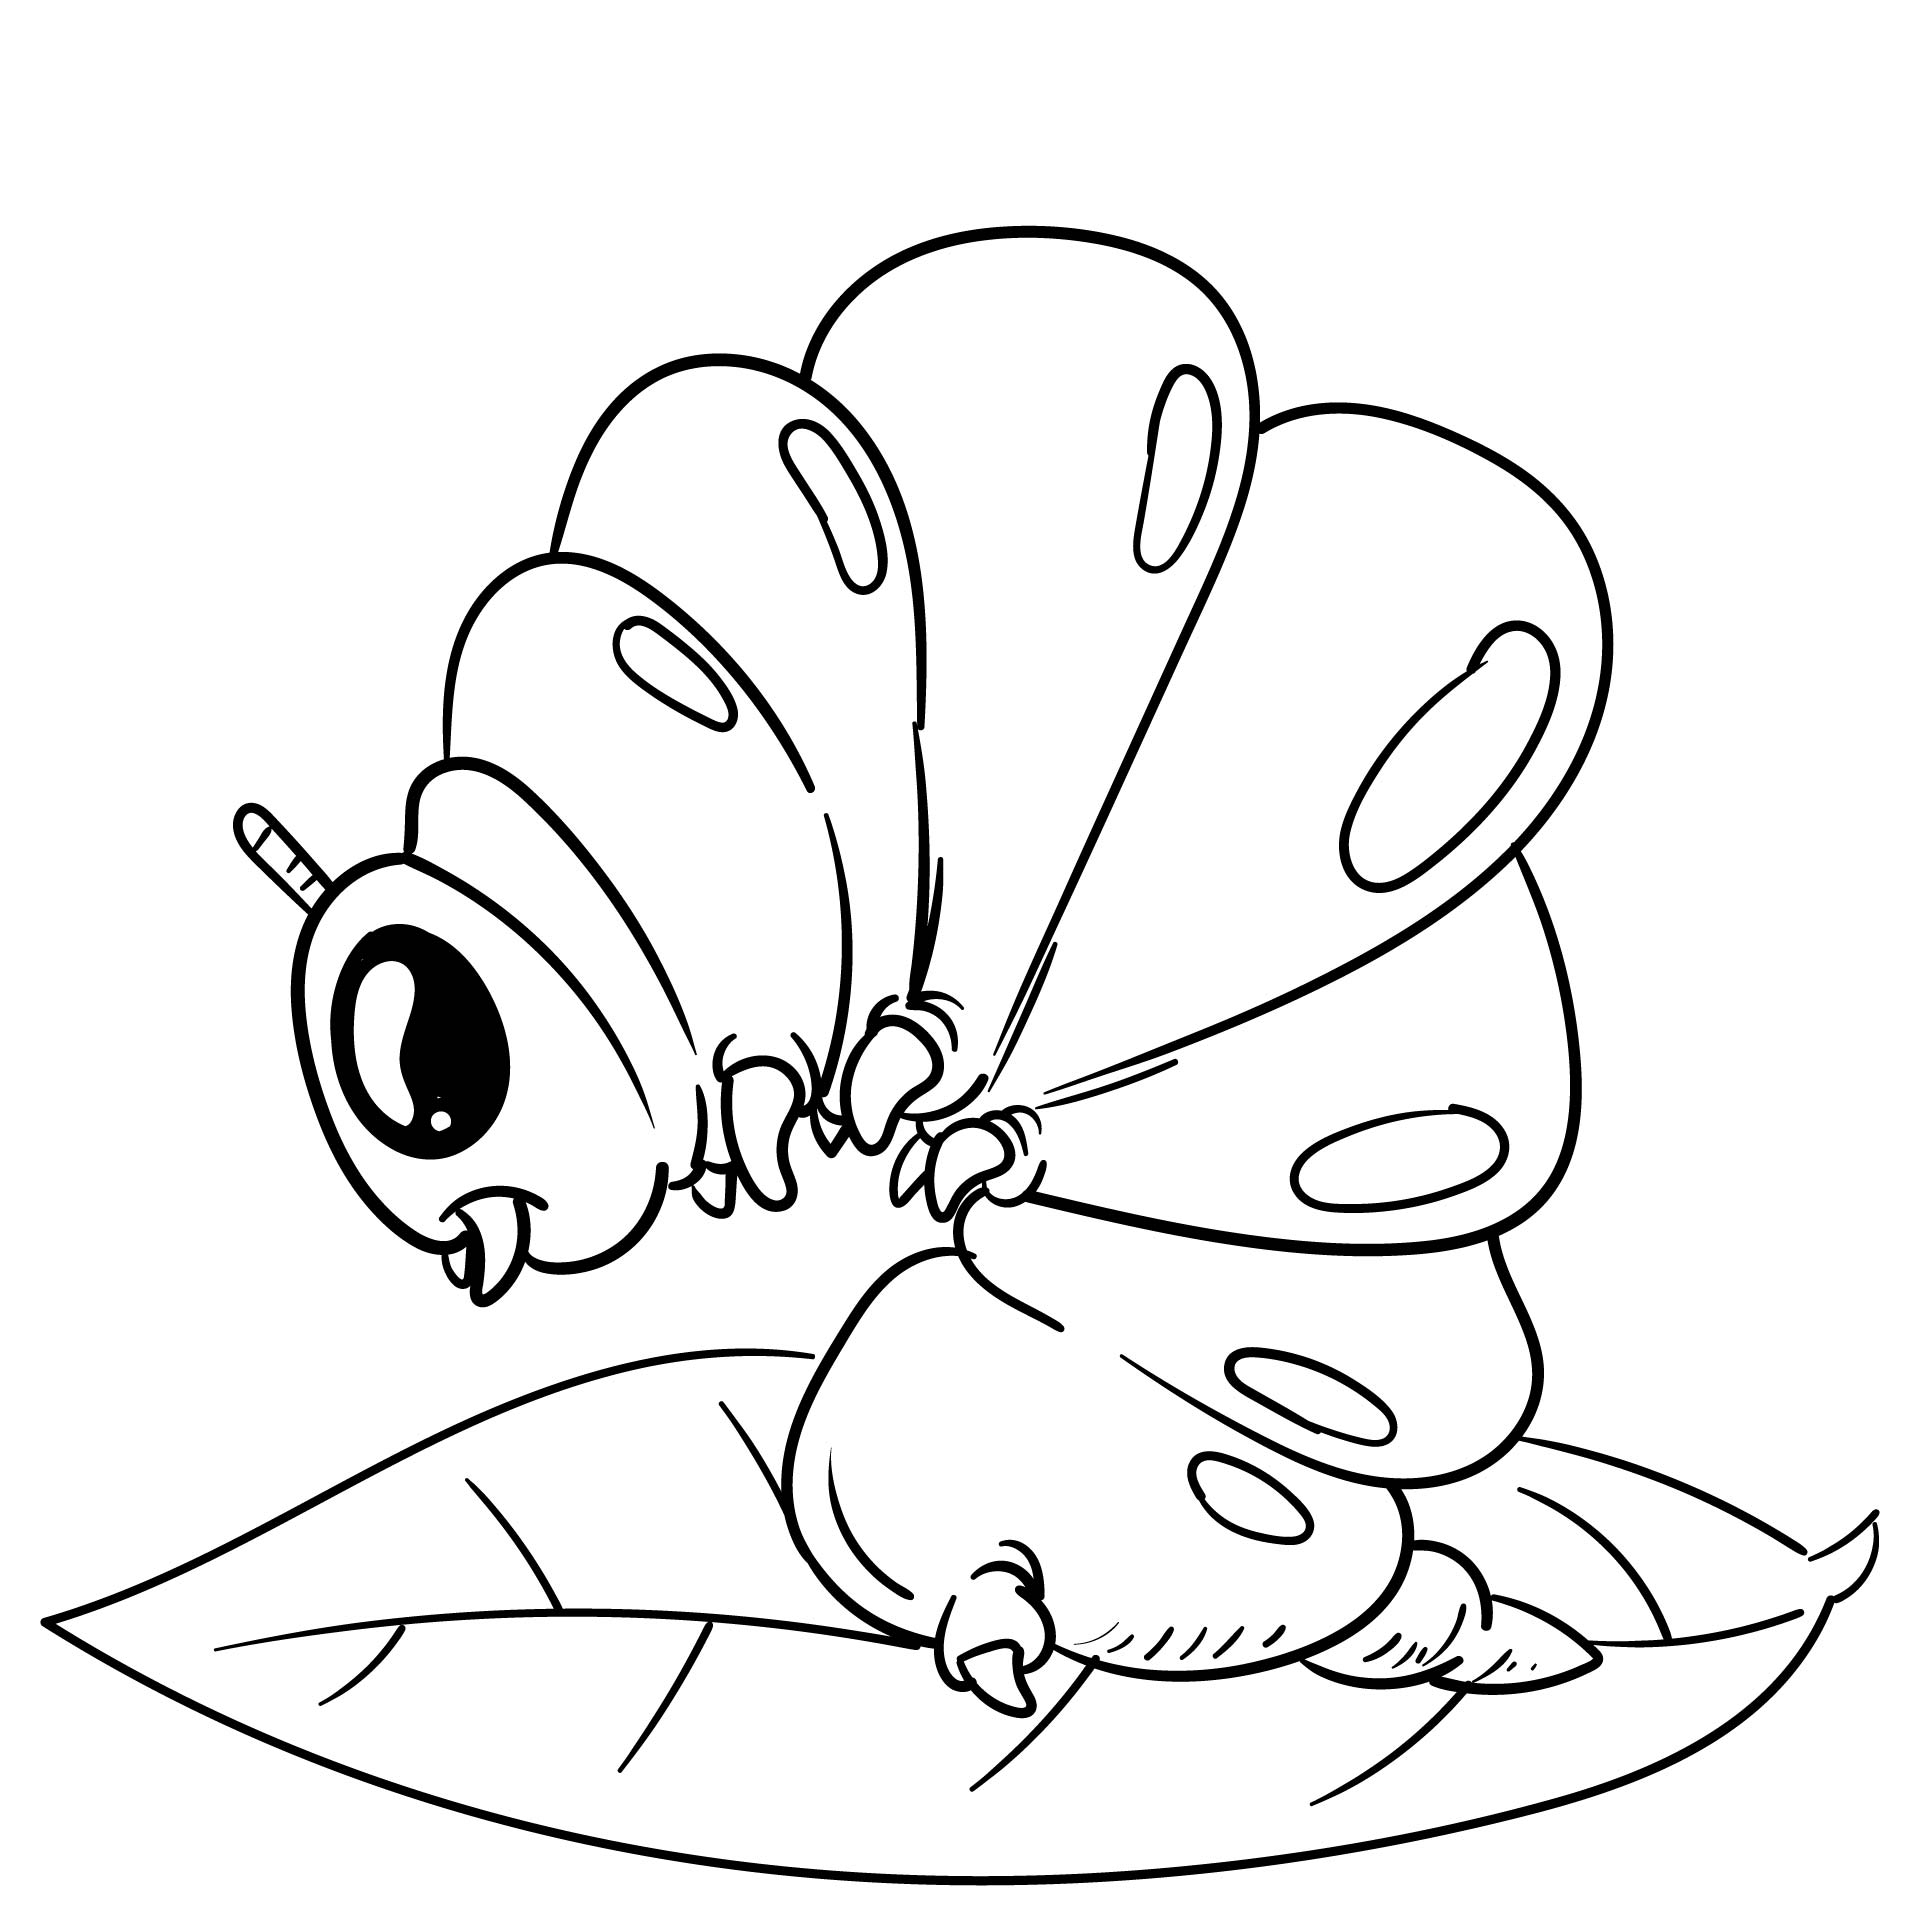 8 Best Images of Preschool Caterpillar Printable Coloring Pages